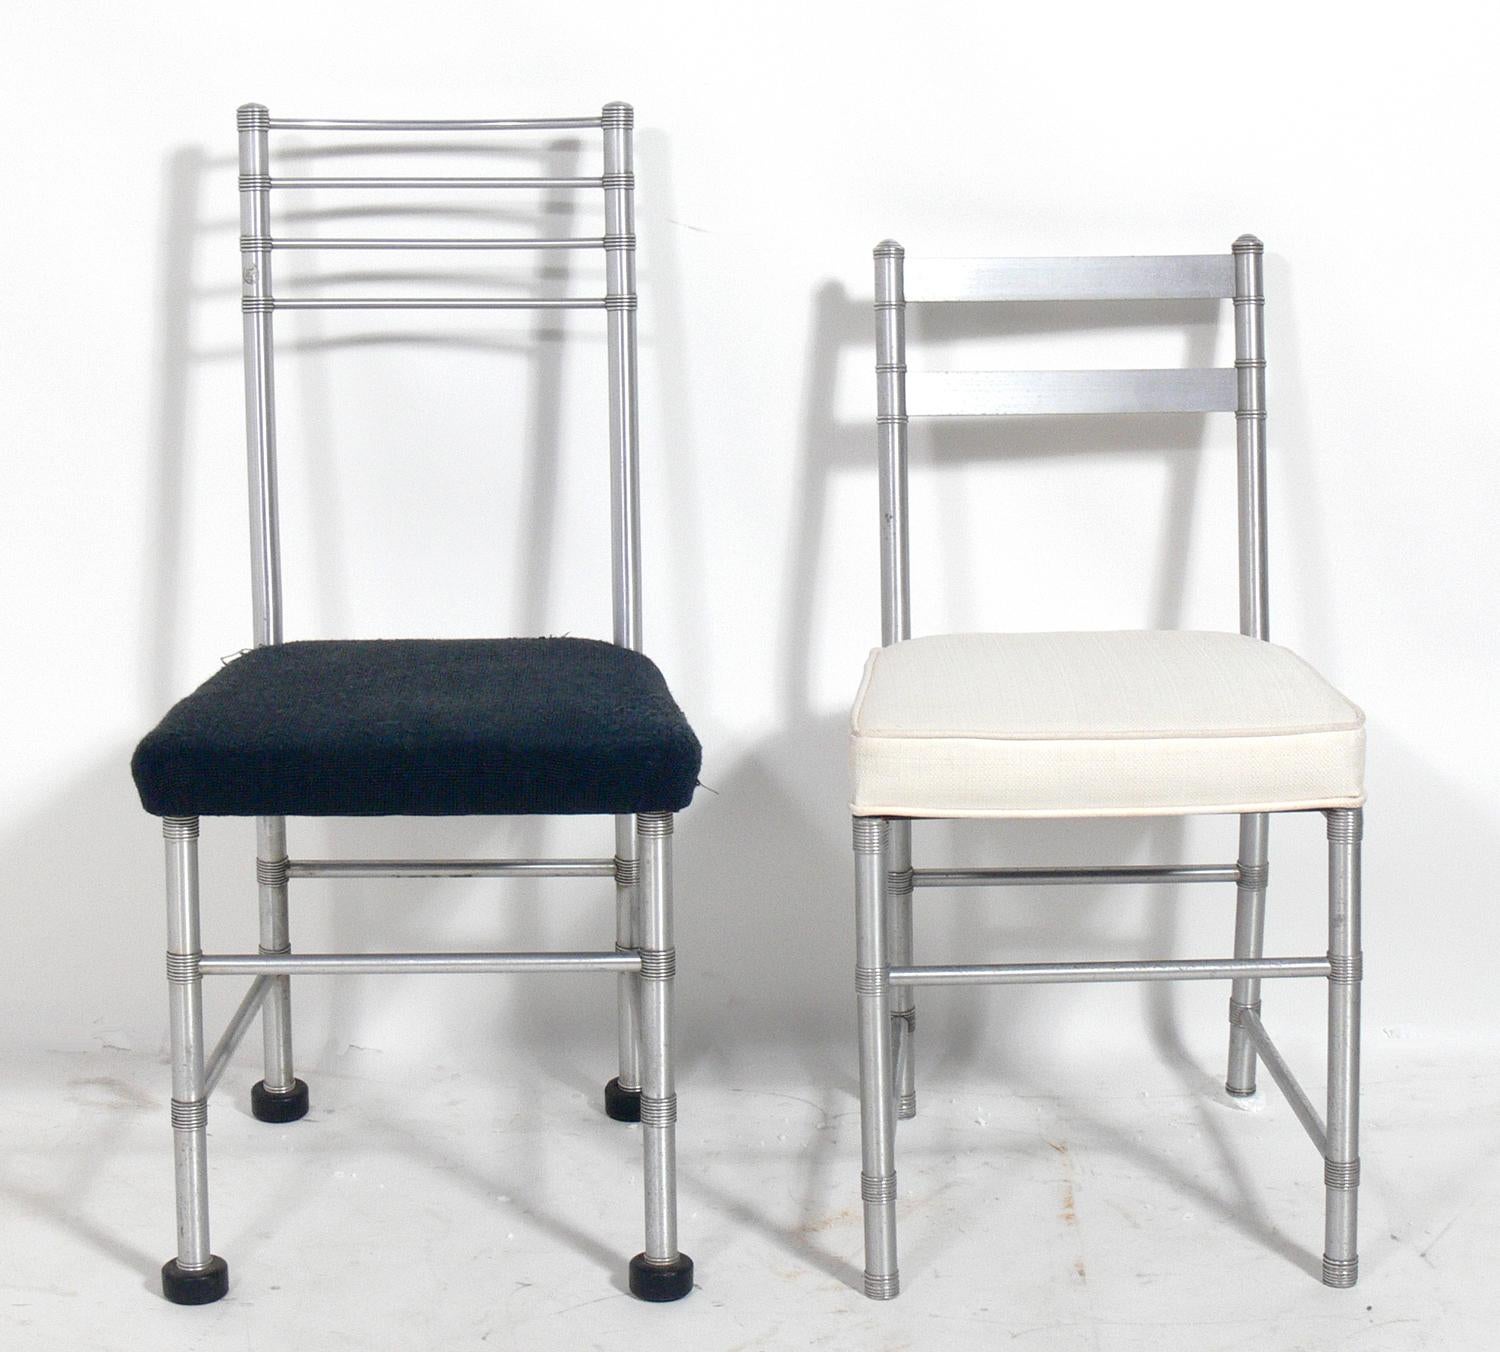 Selection of Art Deco aluminum chairs, designed by Warren McArthur, American, circa 1930s. These can be used as dining, desk, or occasional chairs. They are priced at $1500 each. They measure: 
1) Top left, 35.5